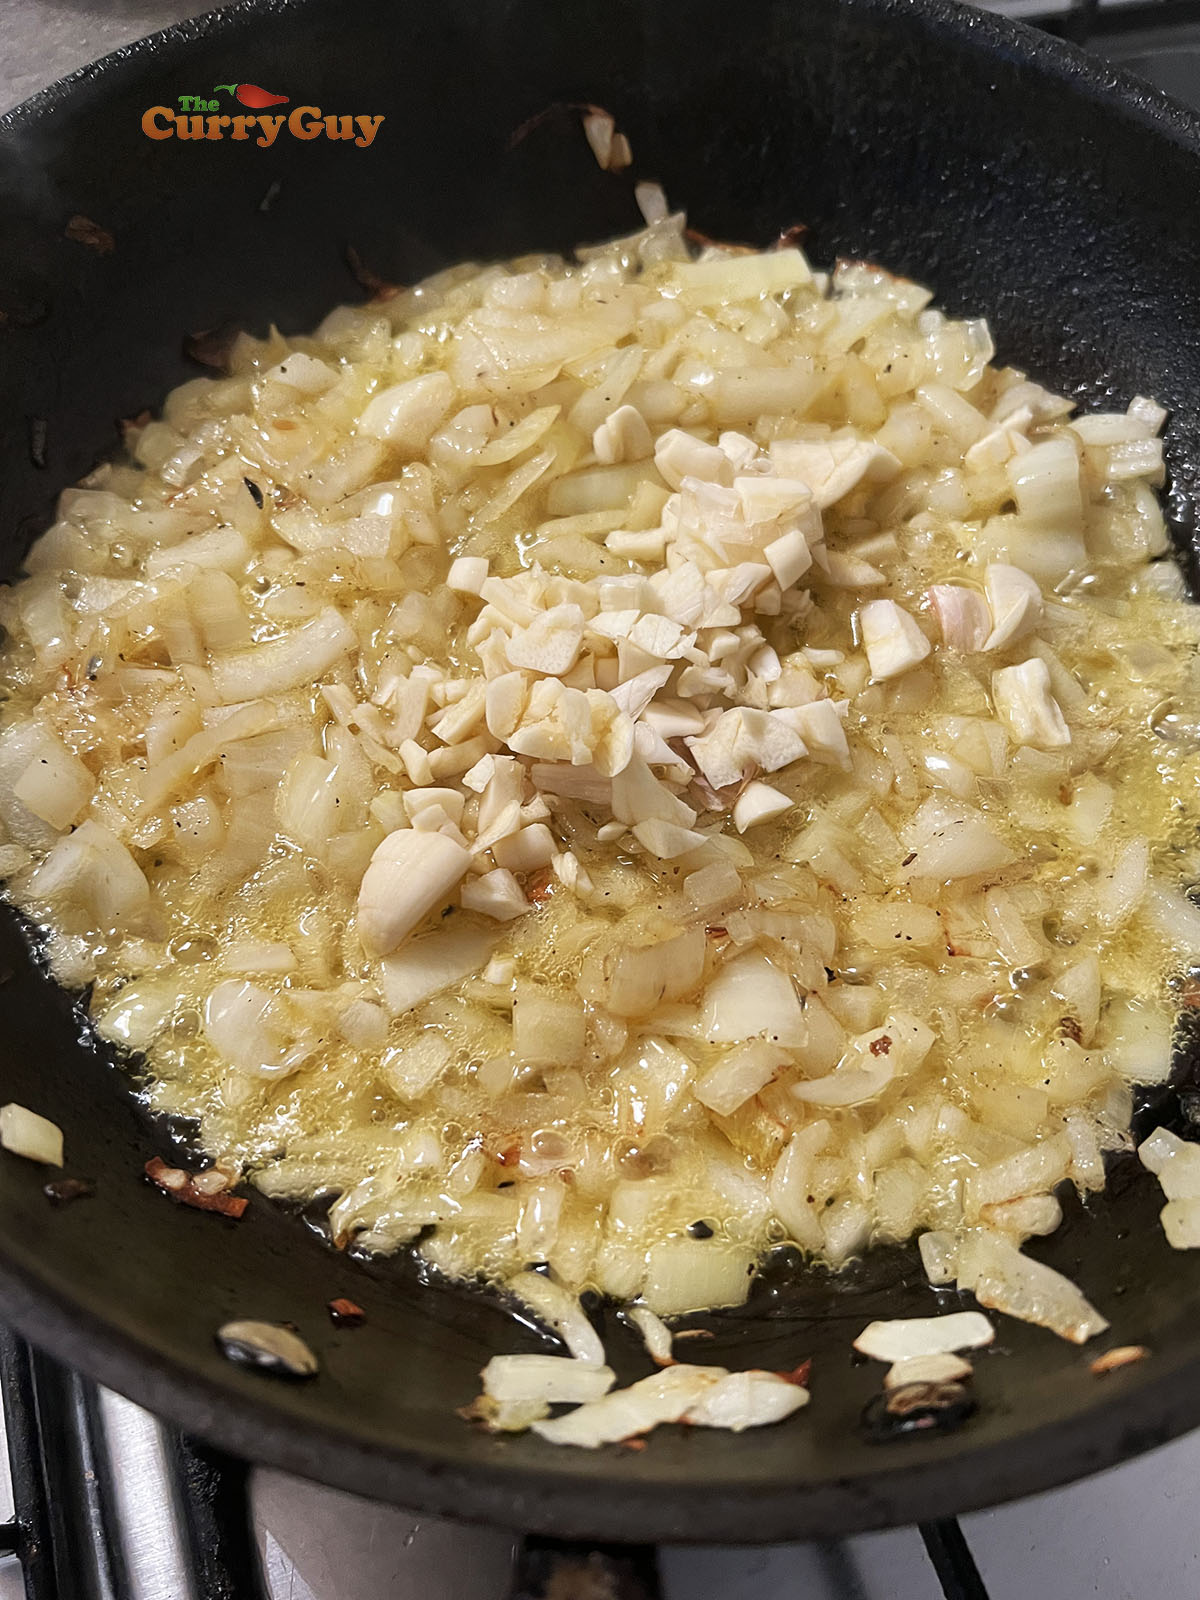 Frying onions and garlic